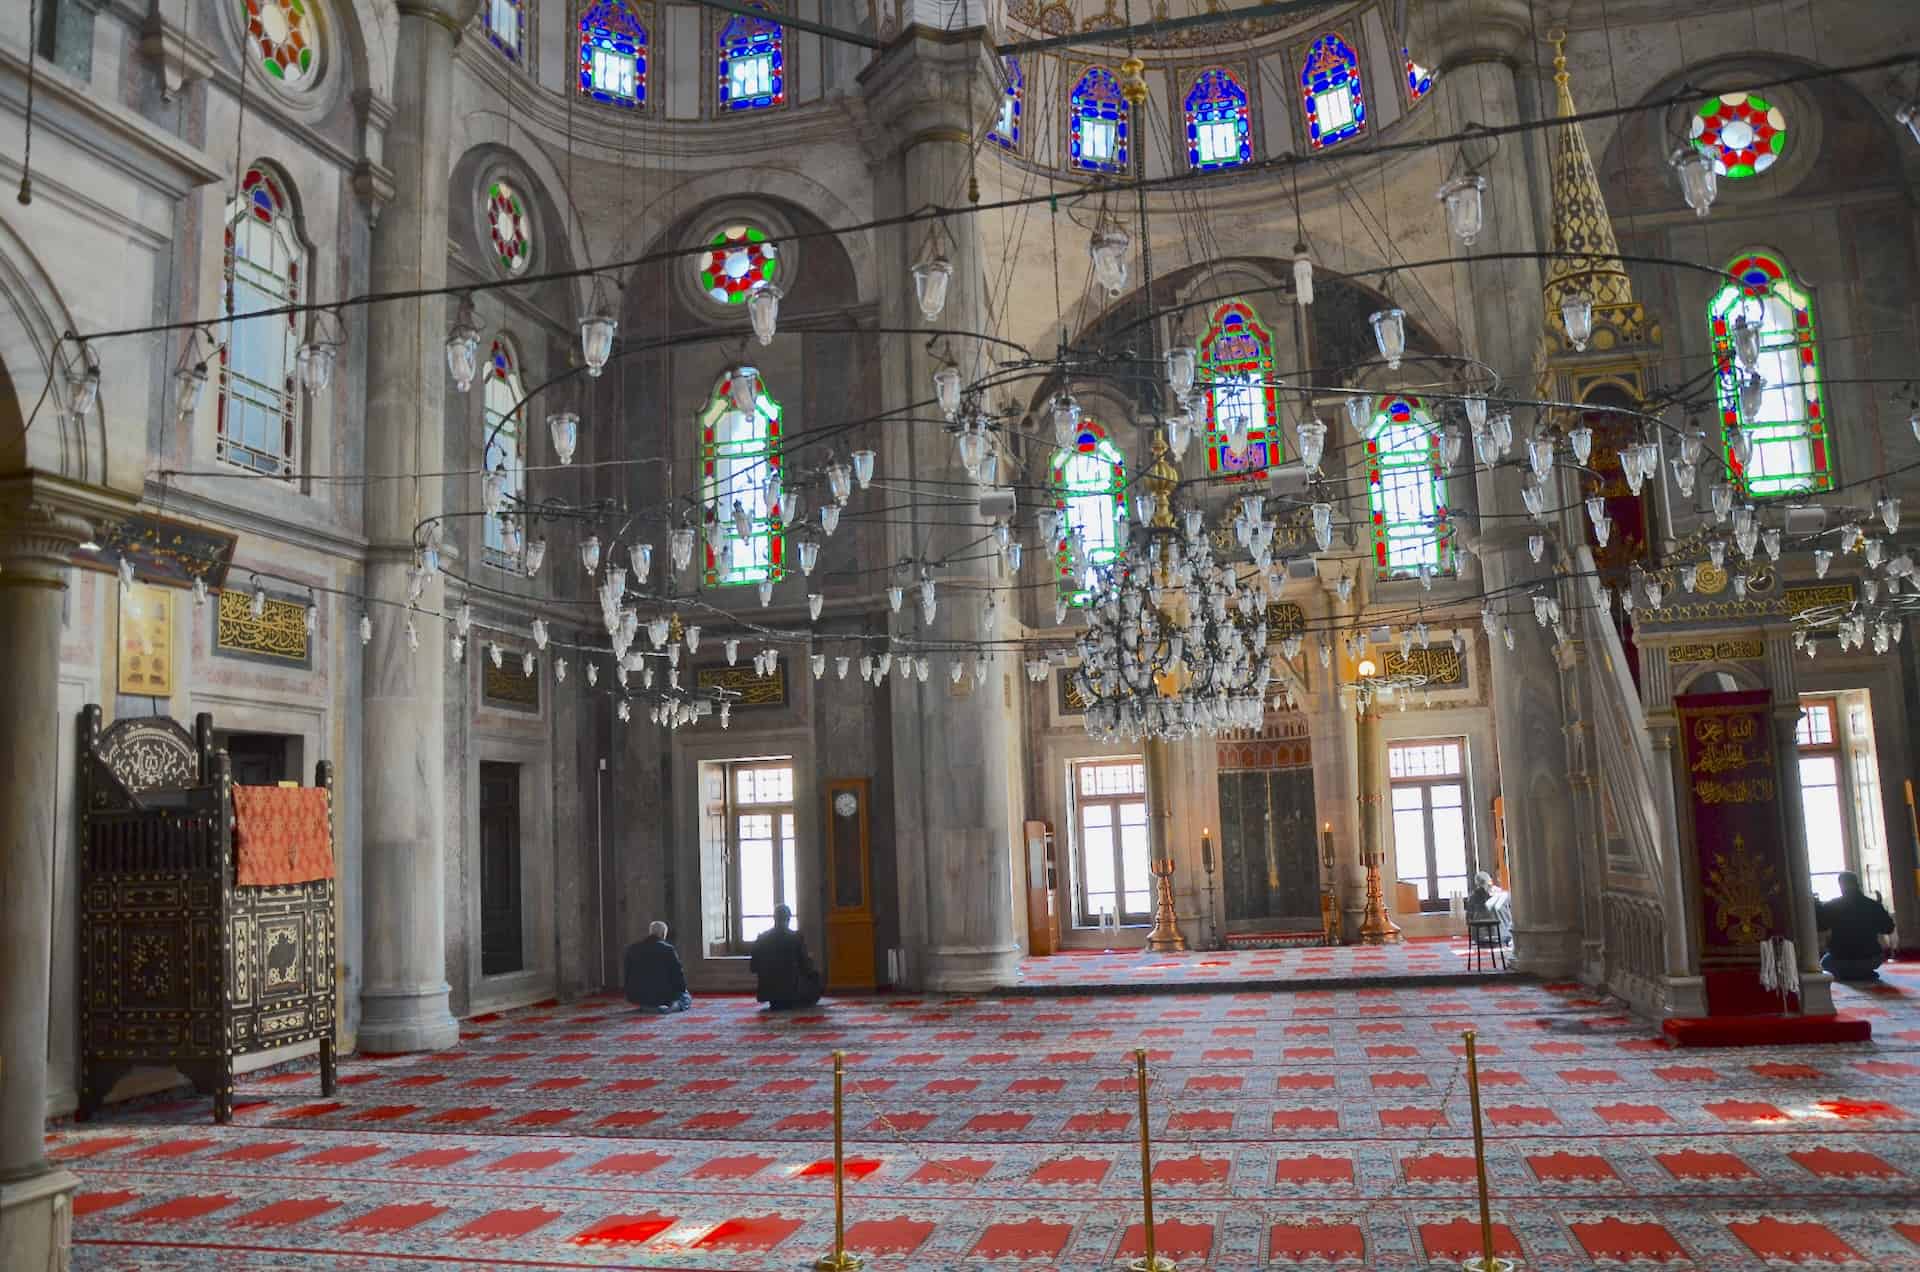 Prayer hall of the Laleli Mosque in Istanbul, Turkey